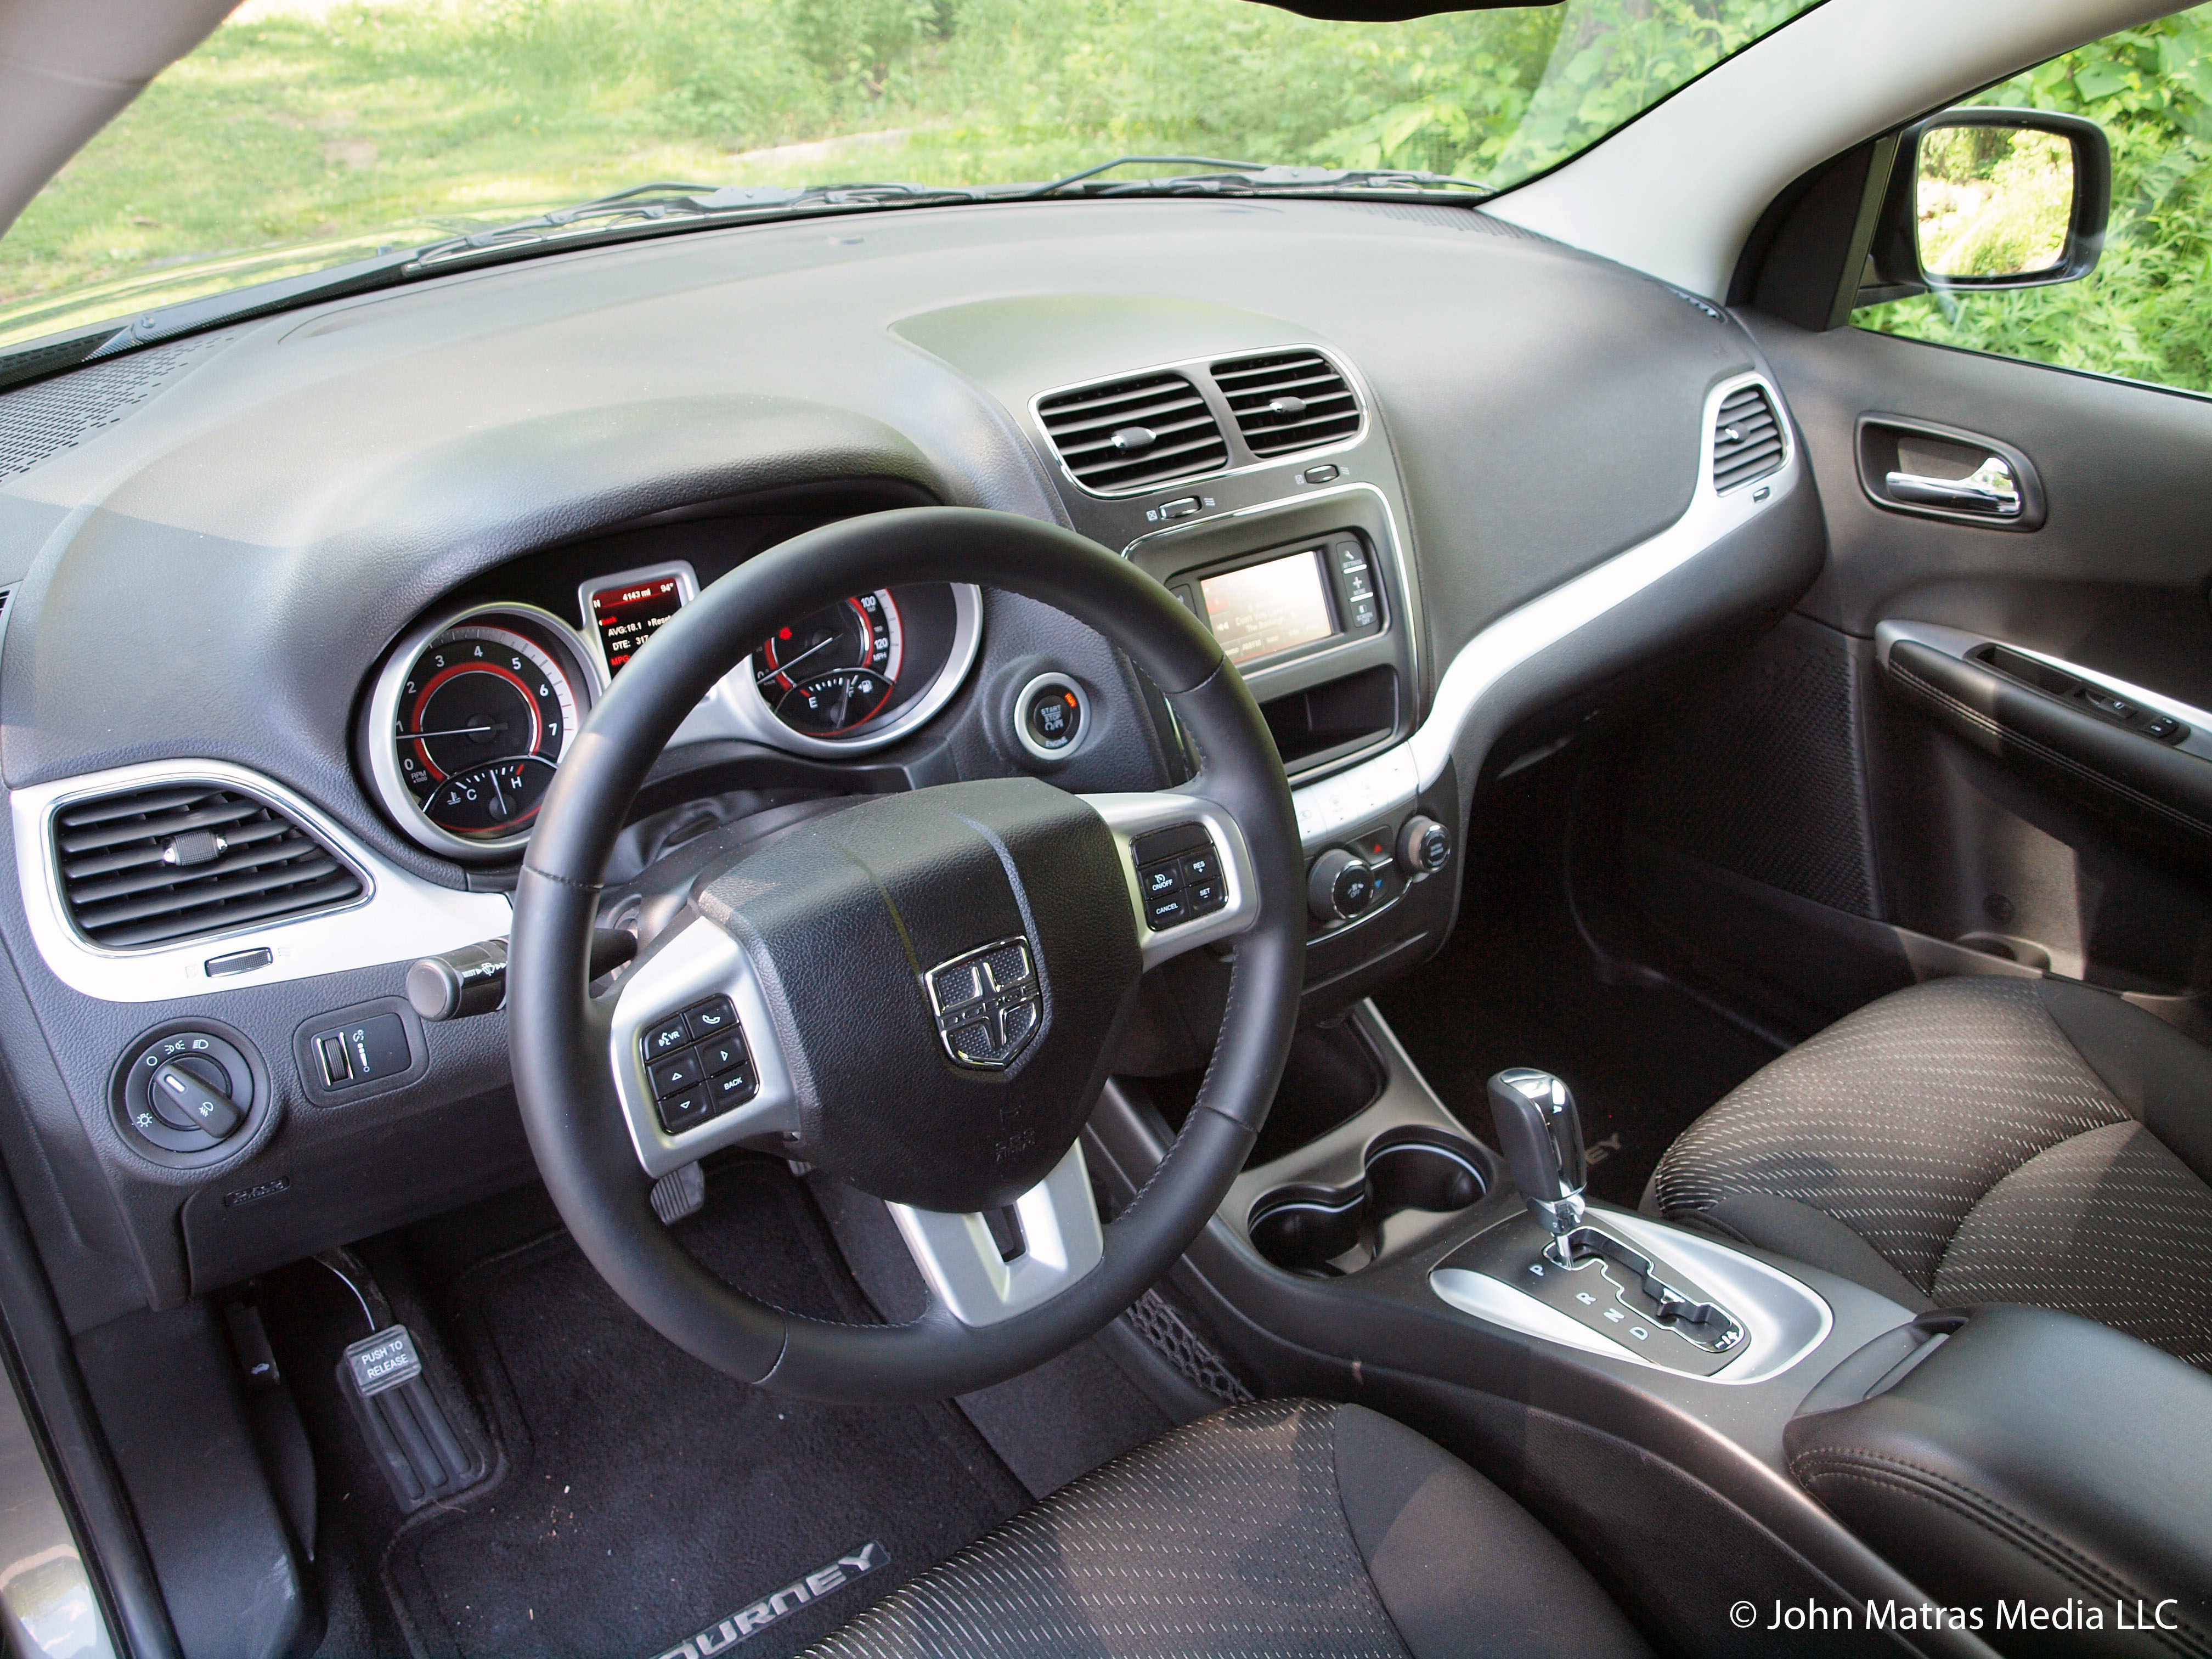 2012 Dodge Journey SXT int. The interior of the Dodge Journey was greatly